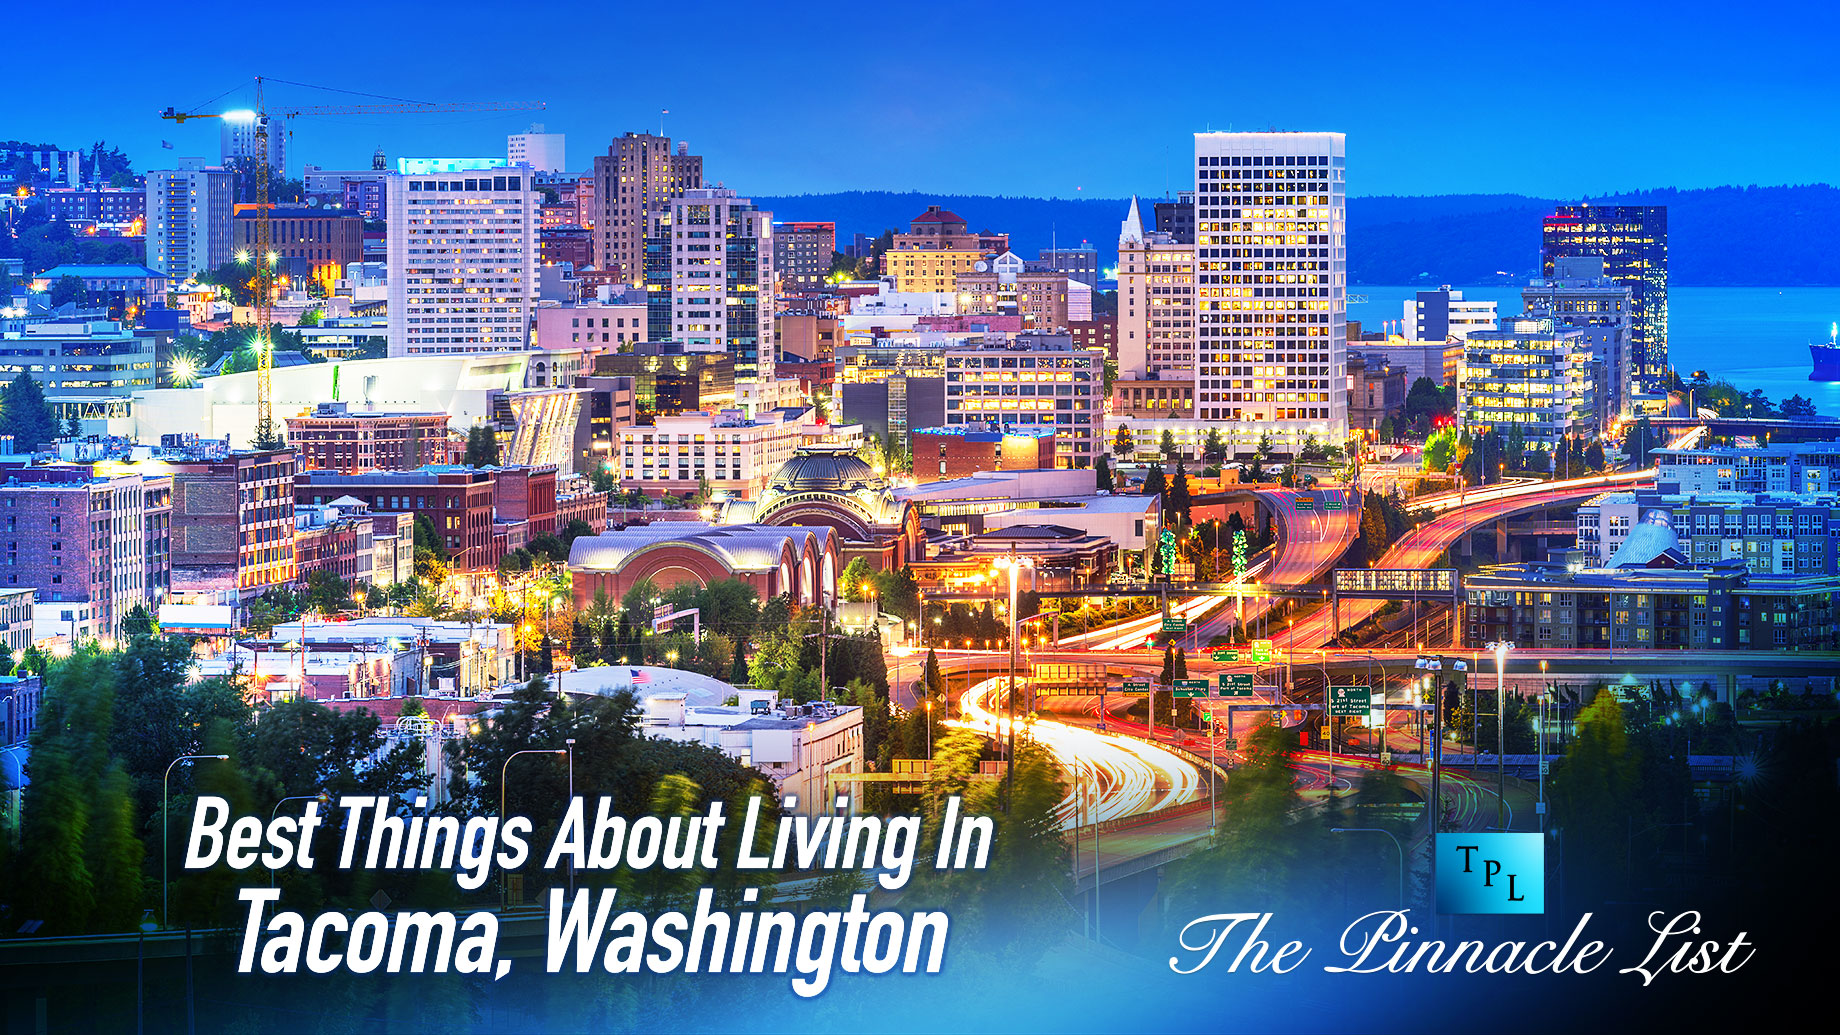 Best Things About Living In Tacoma, Washington